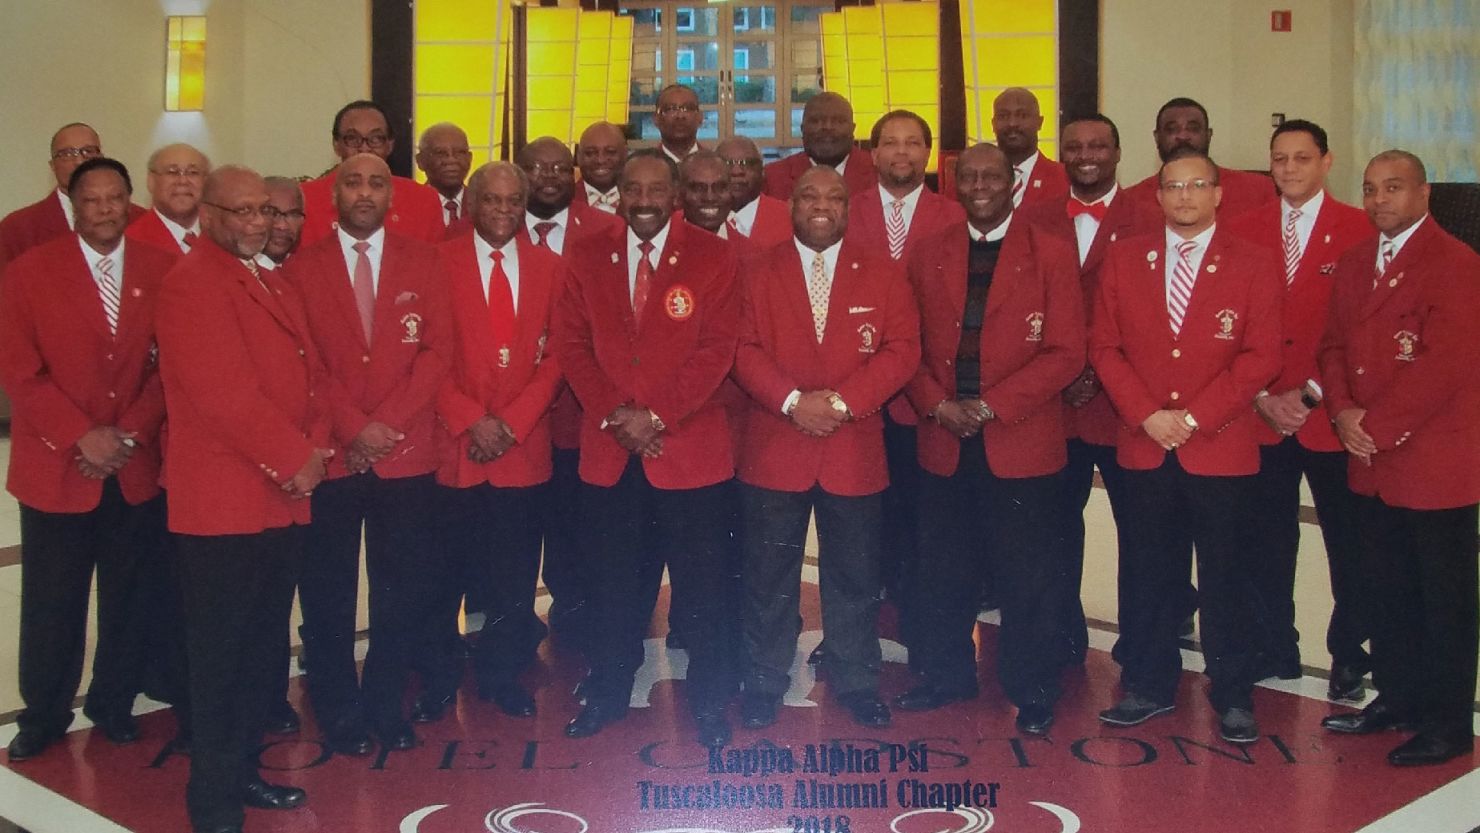 Members of the Tuscaloosa alumni chapter of Kappa Alpha Psi, in a 2018 photo.